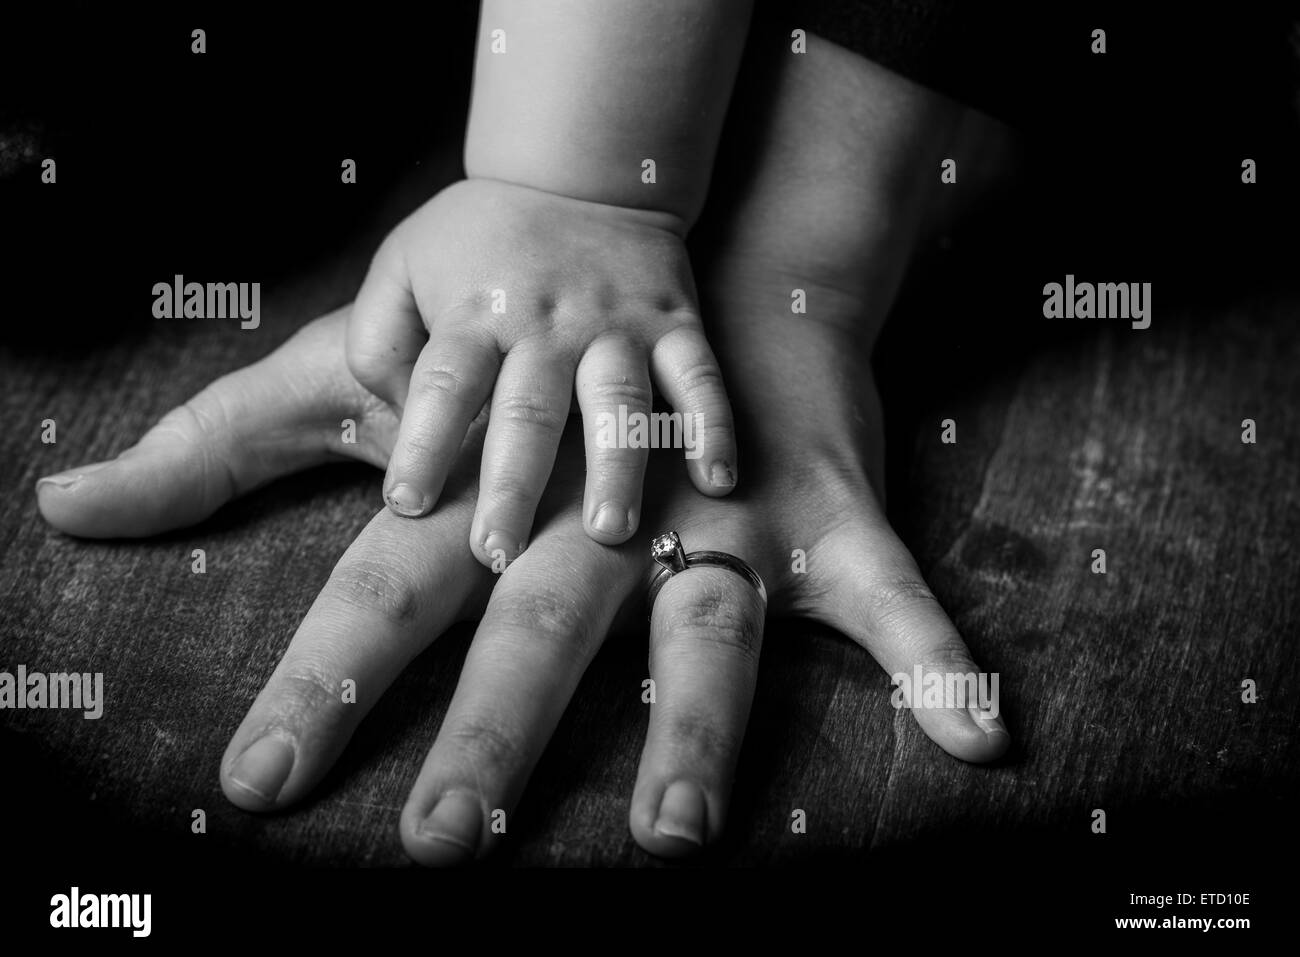 Hands of a mother and young baby. Stock Photo